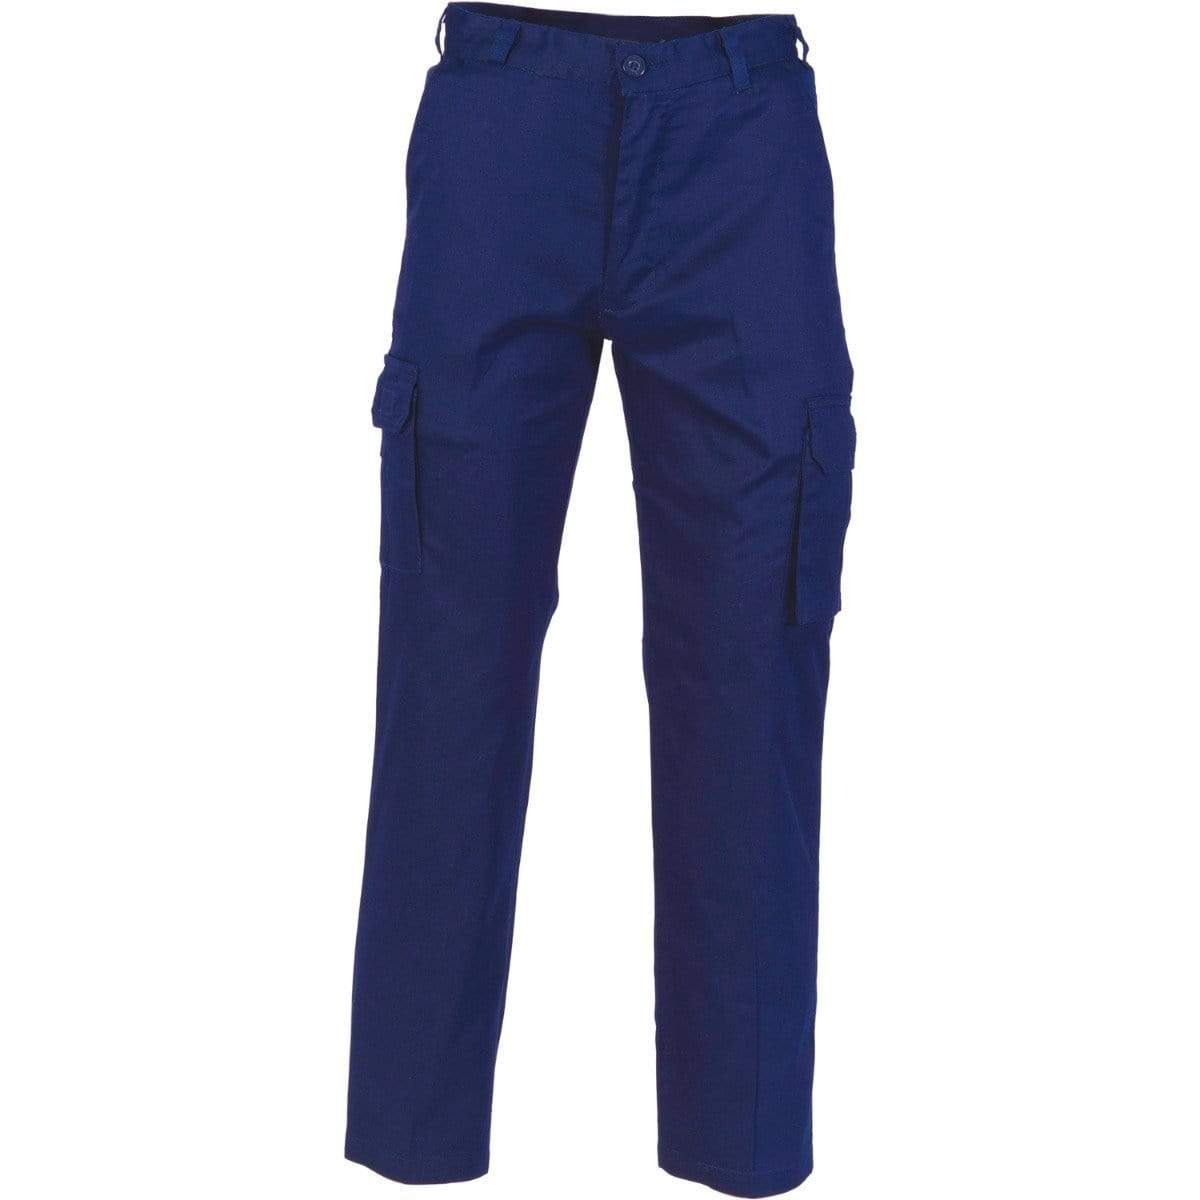 Dnc Workwear Middle Weight Cool - Breeze Cotton Cargo Pants - 3320 Work Wear DNC Workwear Navy 72R 